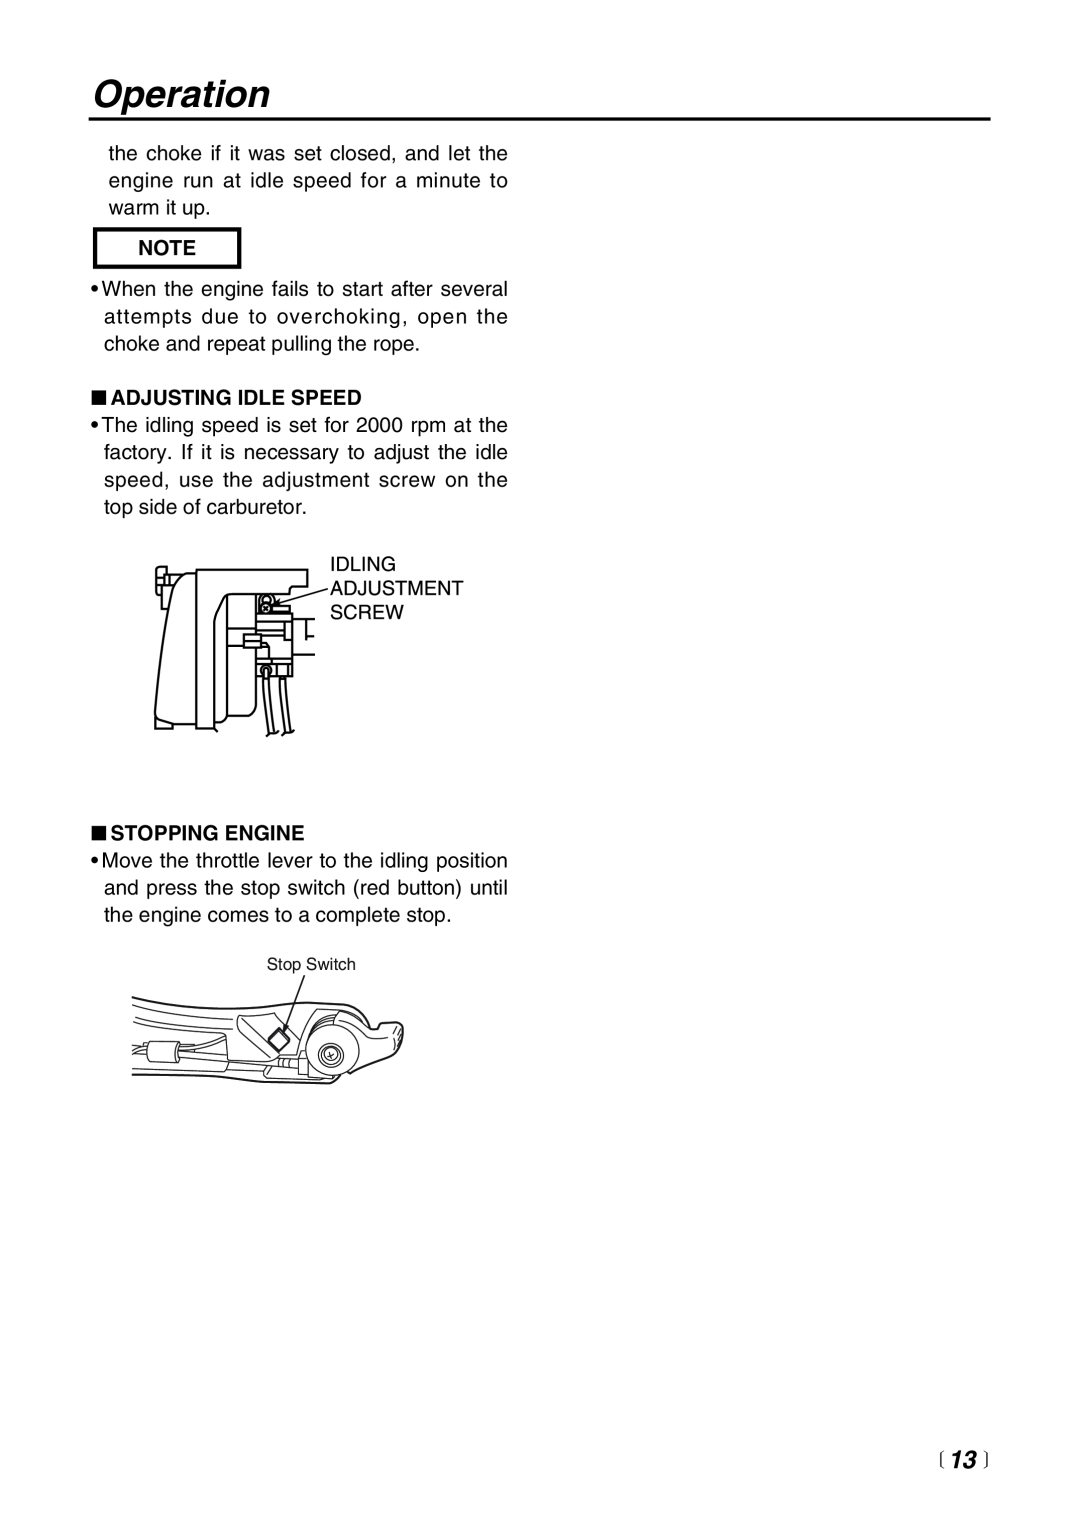 RedMax EB4401 manual Operation, 13 , Adjusting Idle Speed, Stopping Engine 